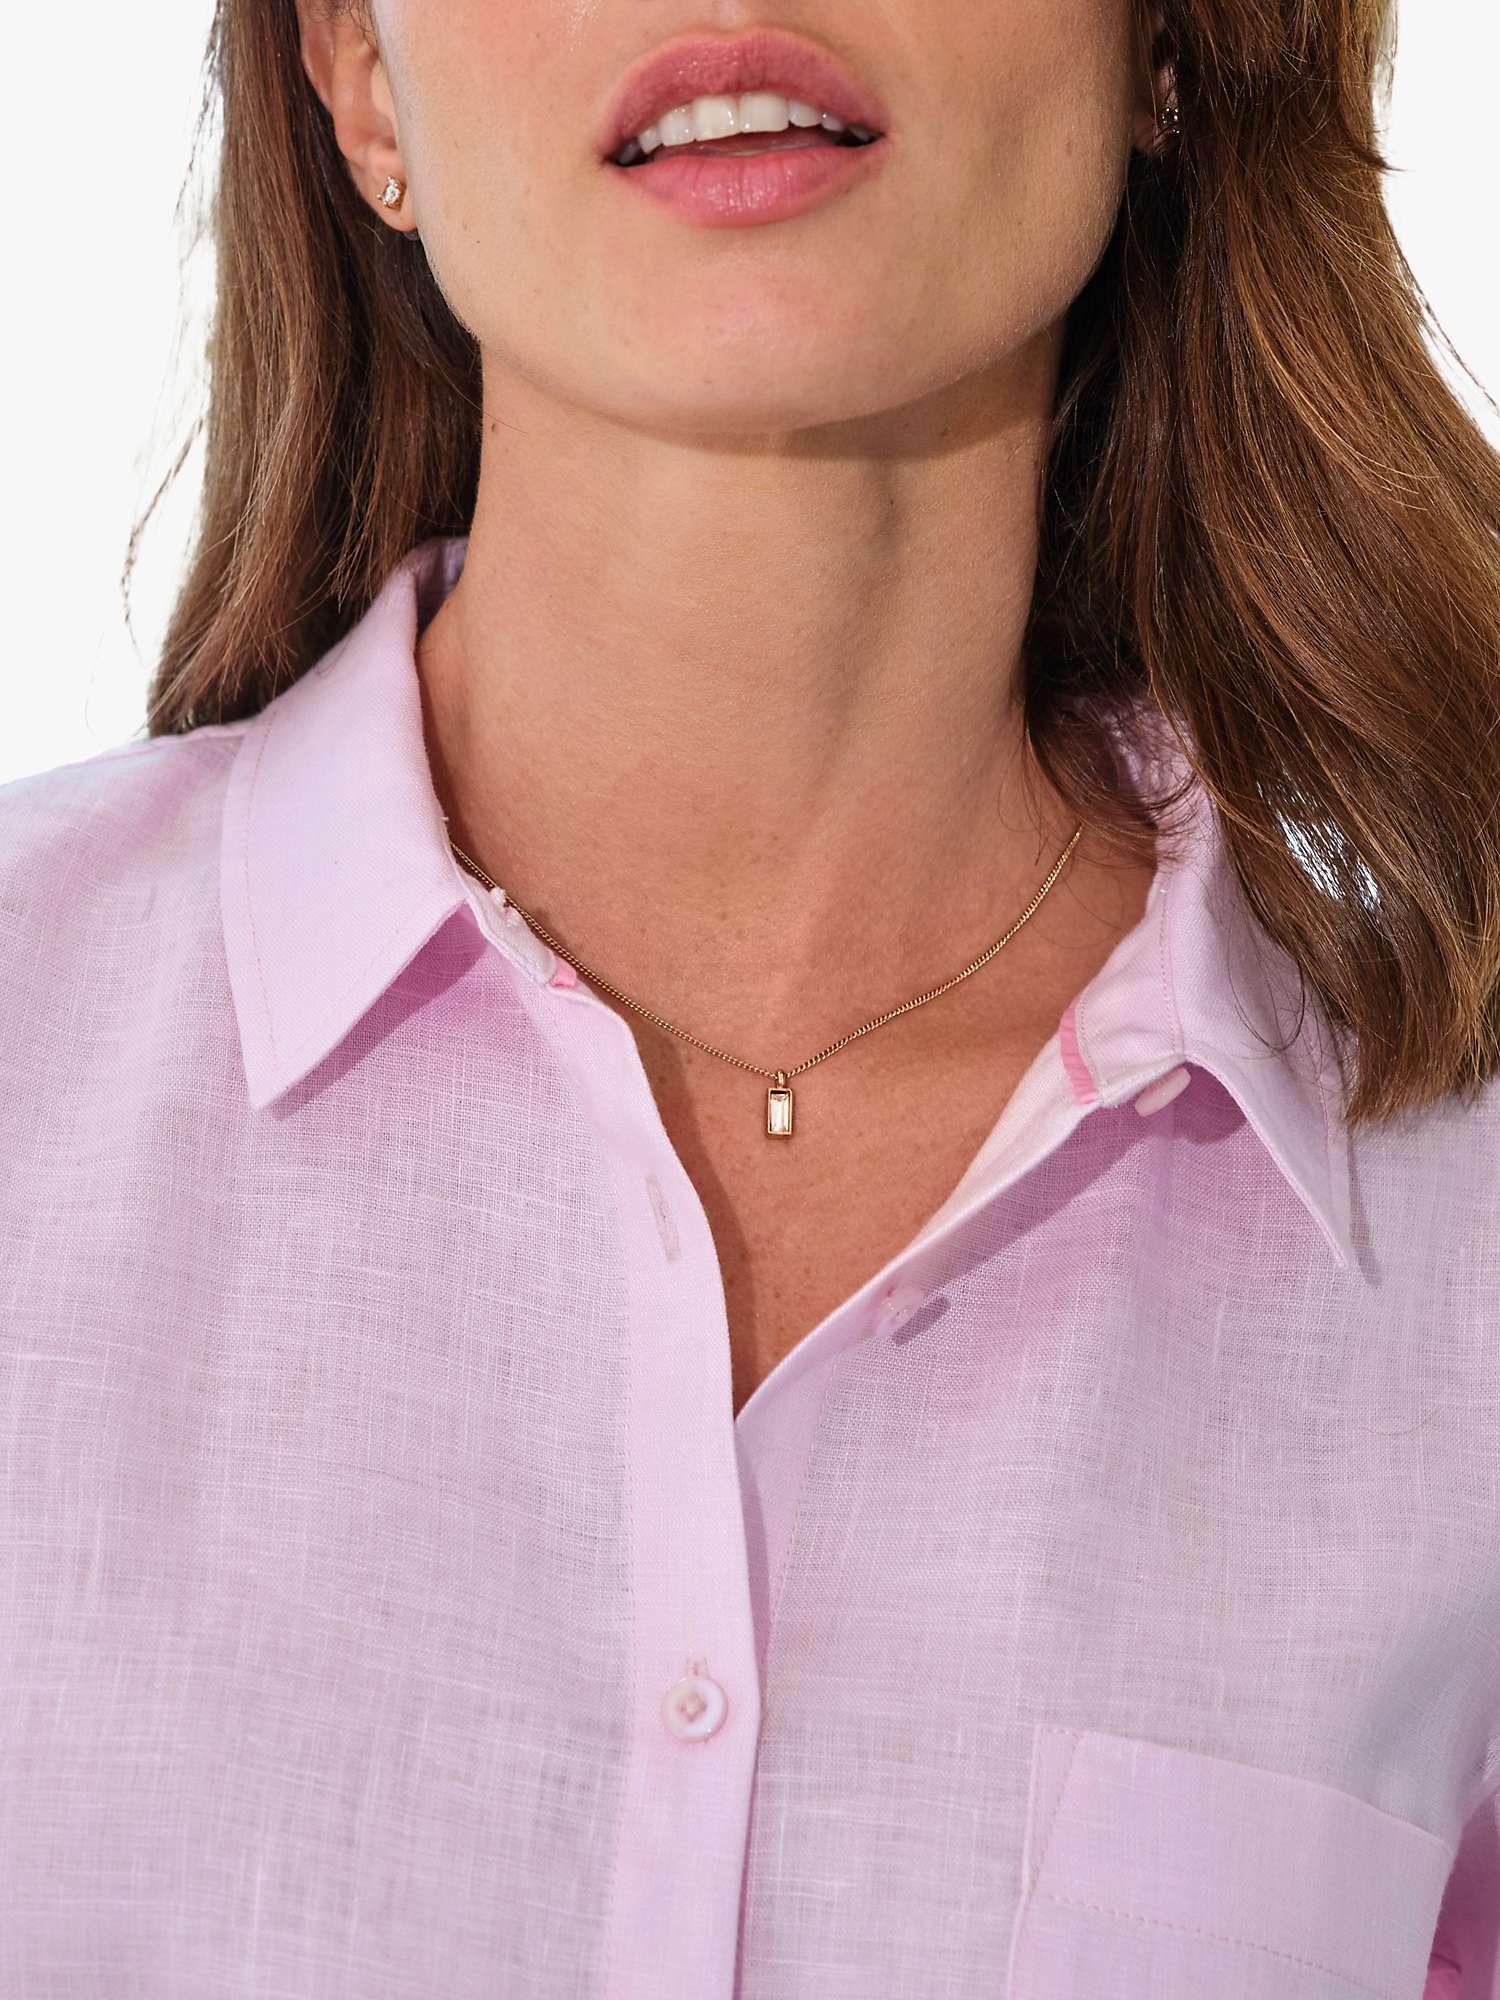 Buy Pure Collection New Linen Shirt Online at johnlewis.com